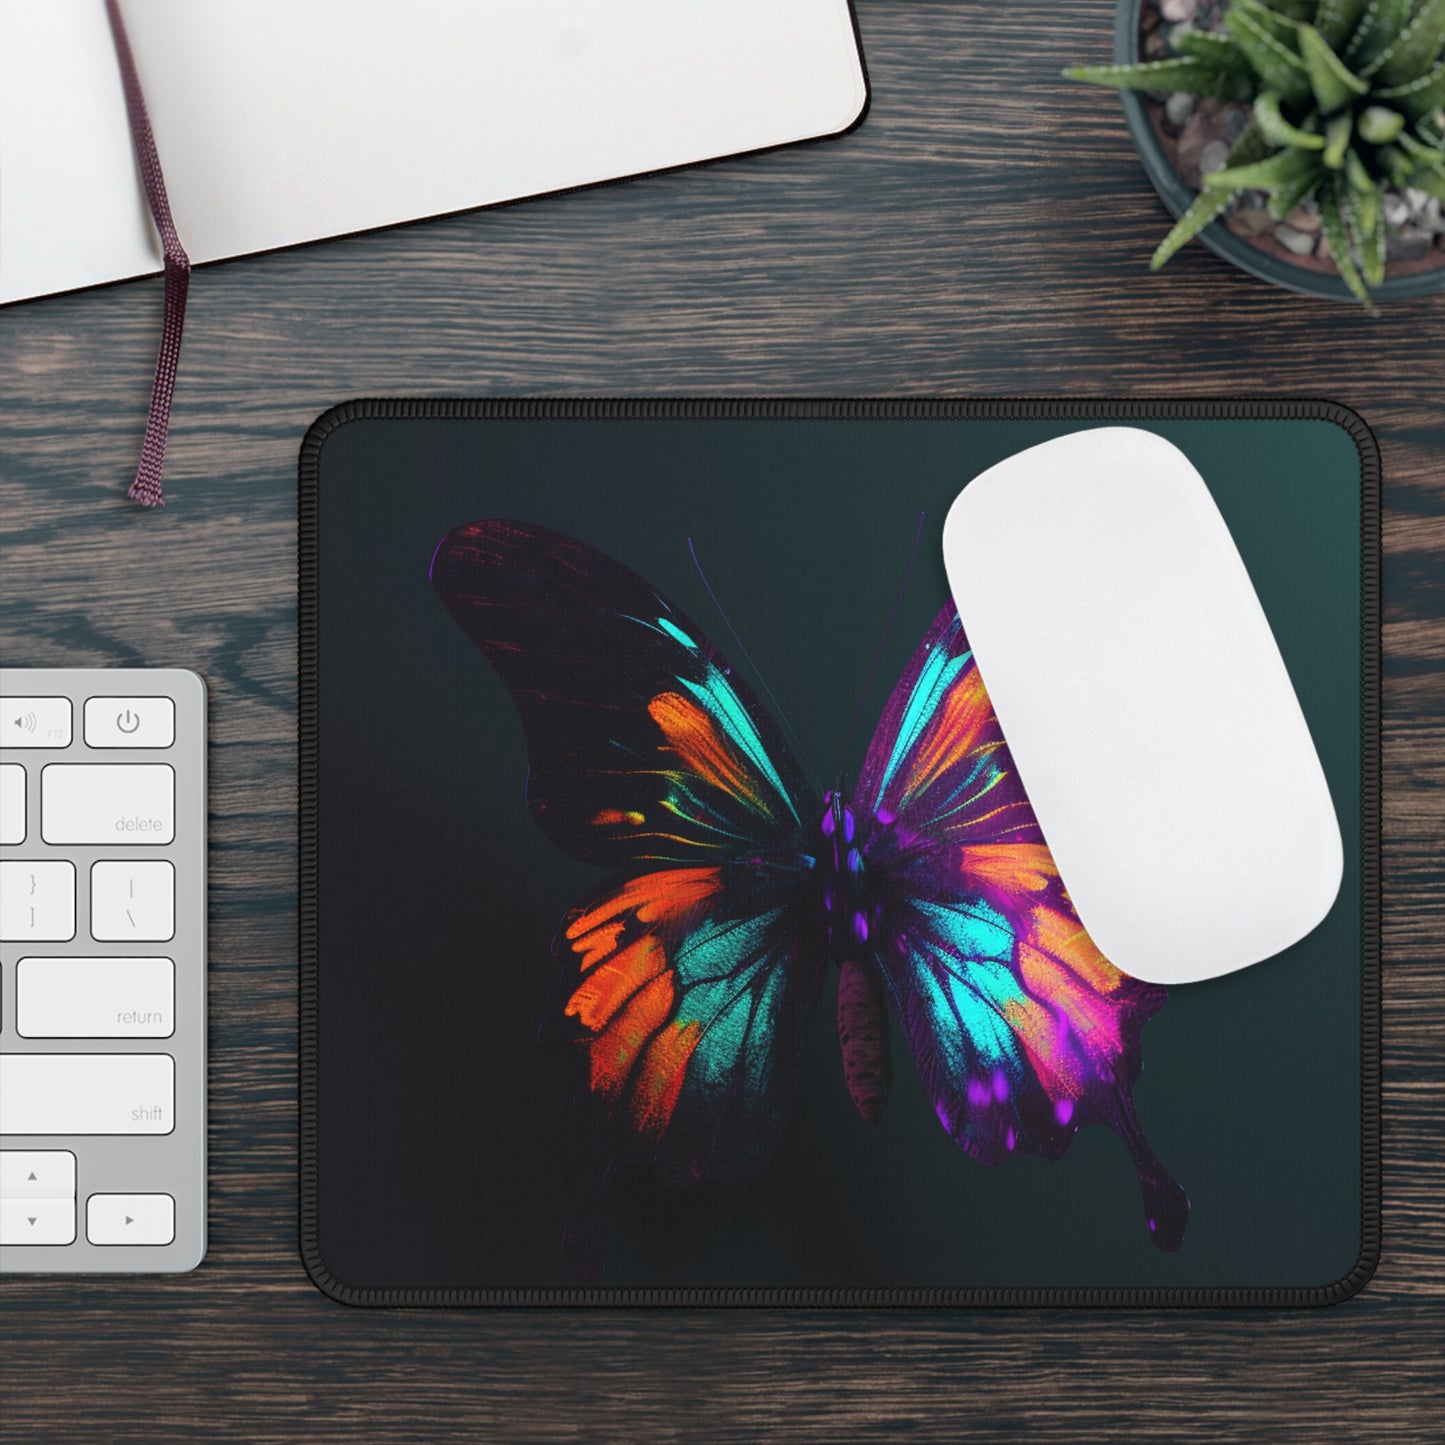 Gaming Mouse Pad  Hyper Colorful Butterfly Purple 4